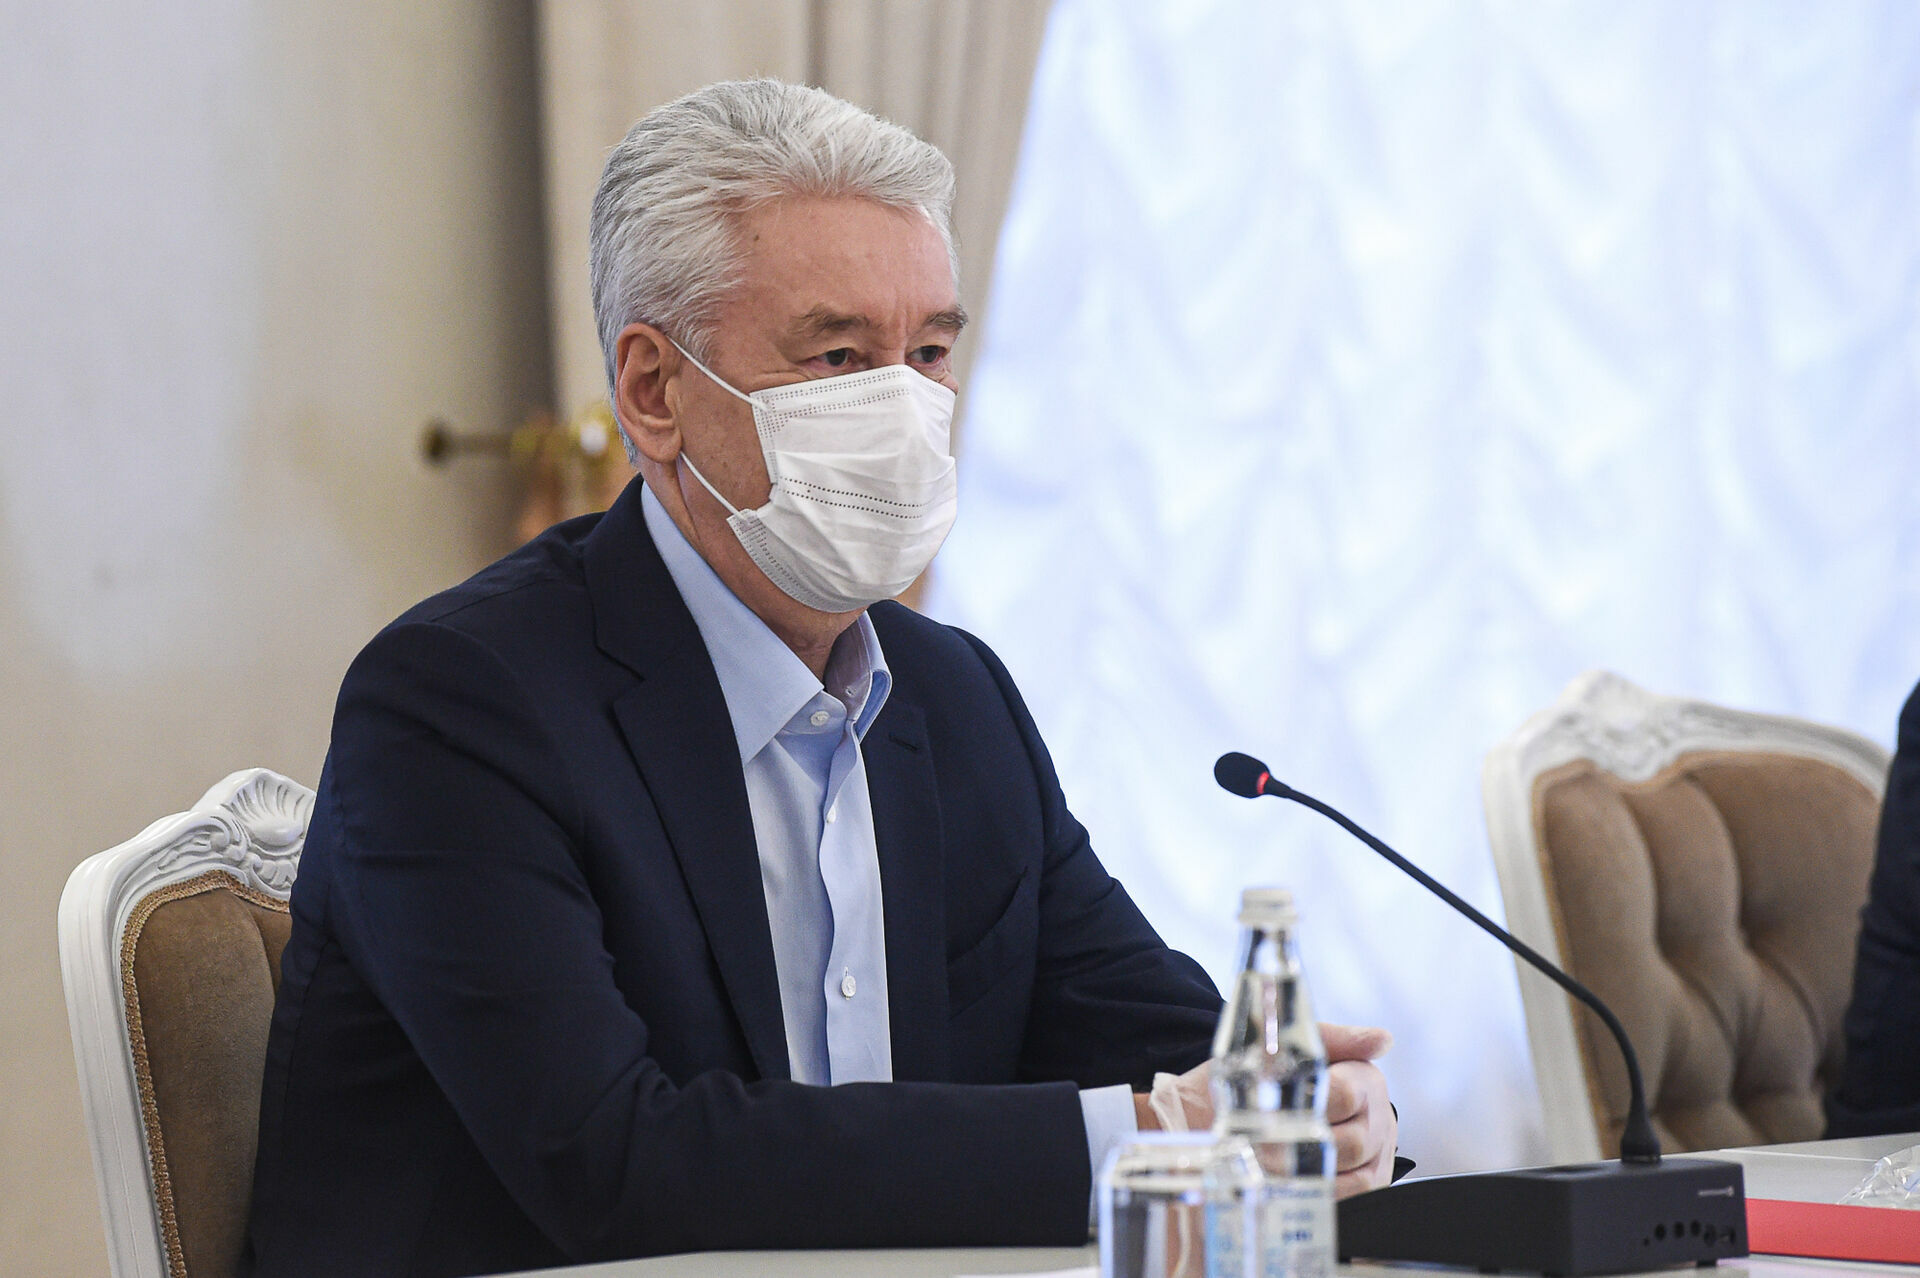 Sobyanin proposed to introduce "segregation" in restaurants for unvaccinated visitors